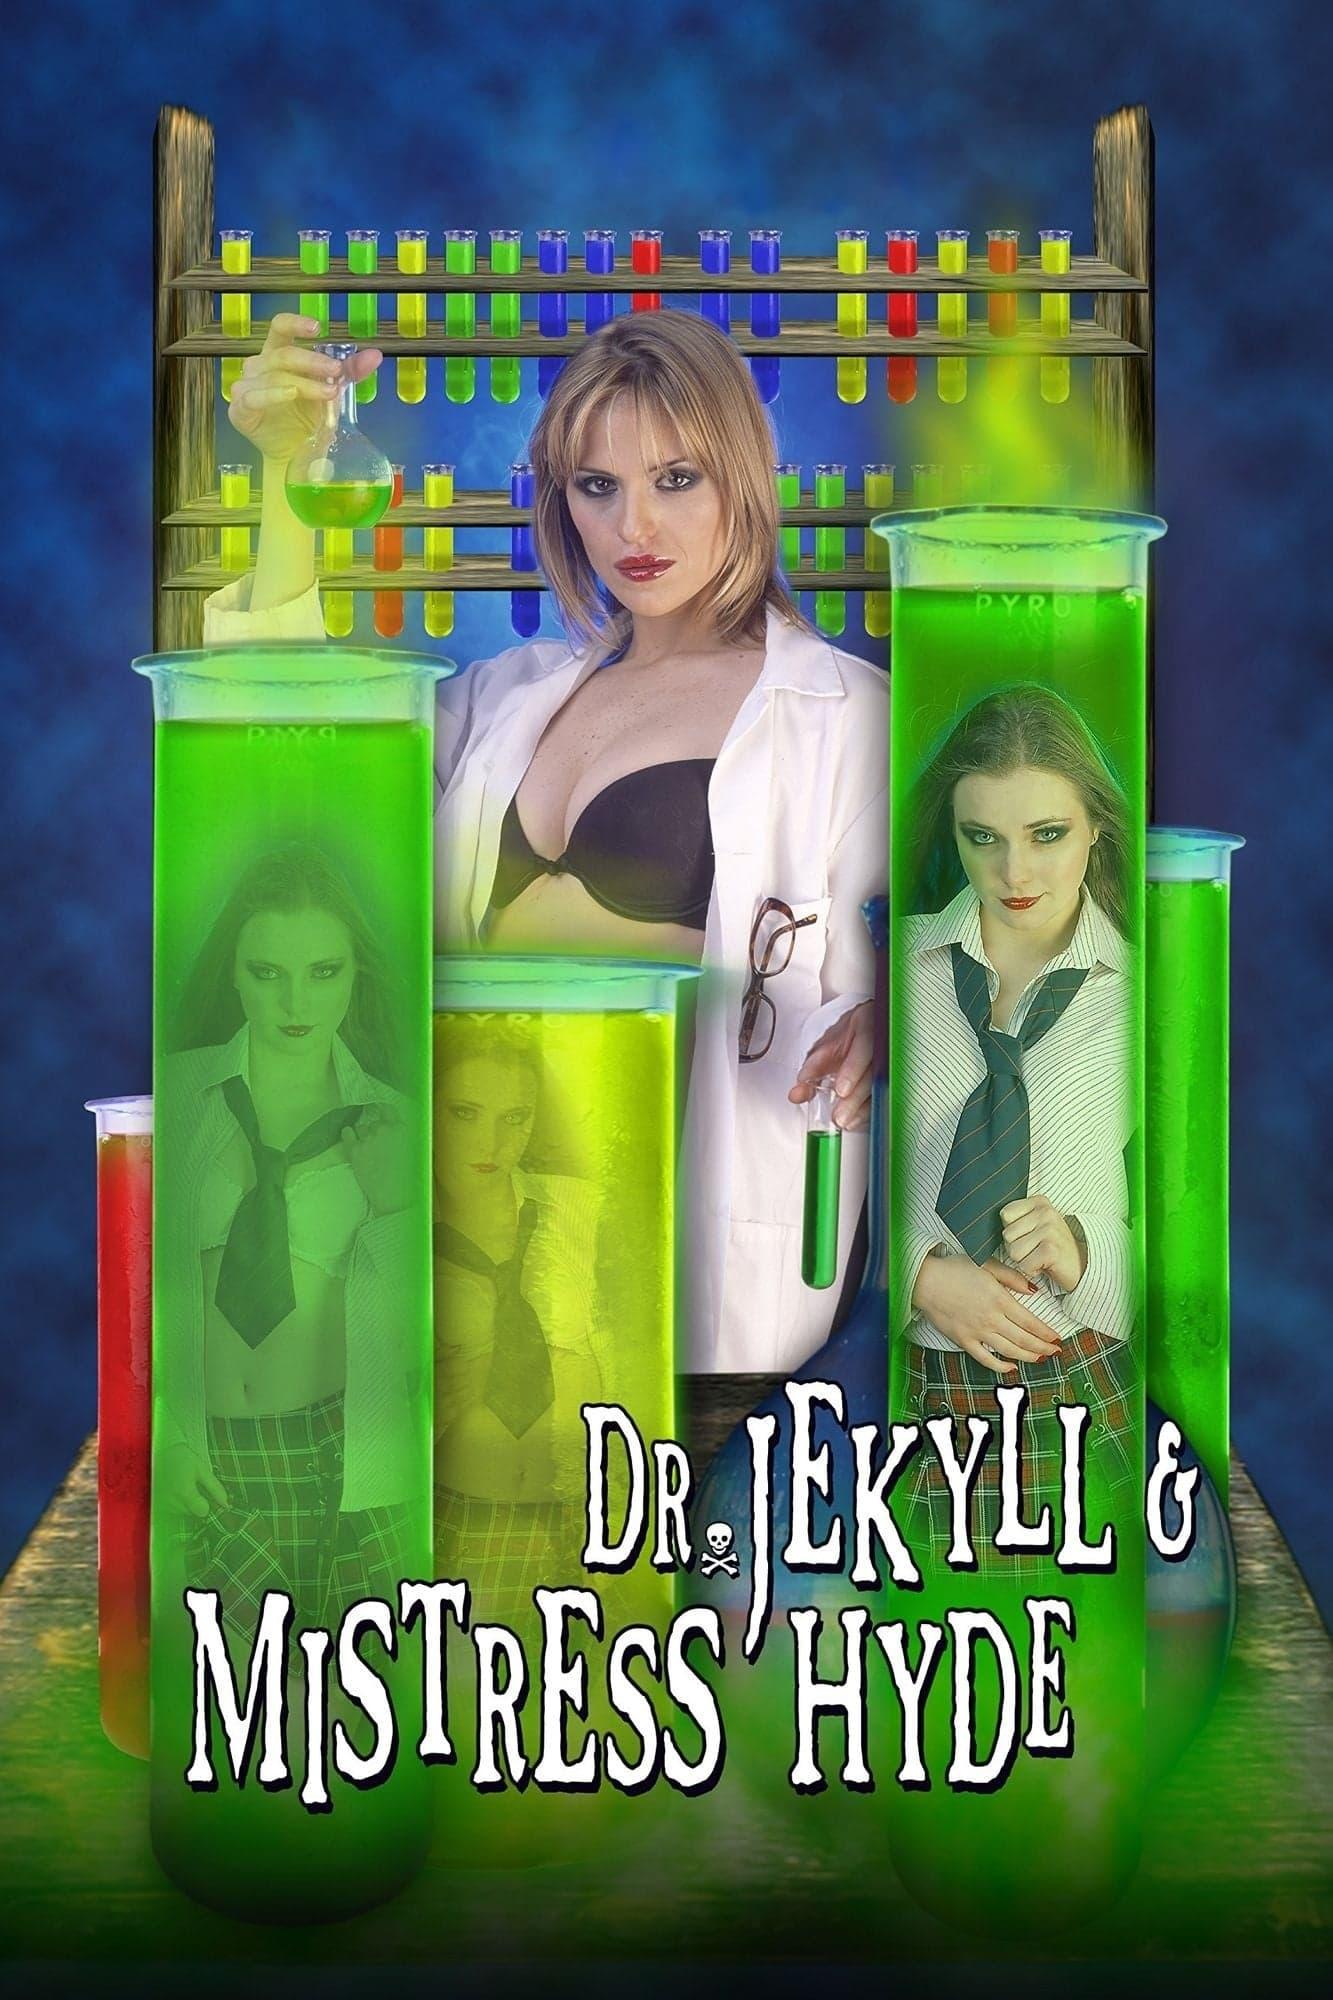 Dr. Jekyll & Mistress Hyde poster